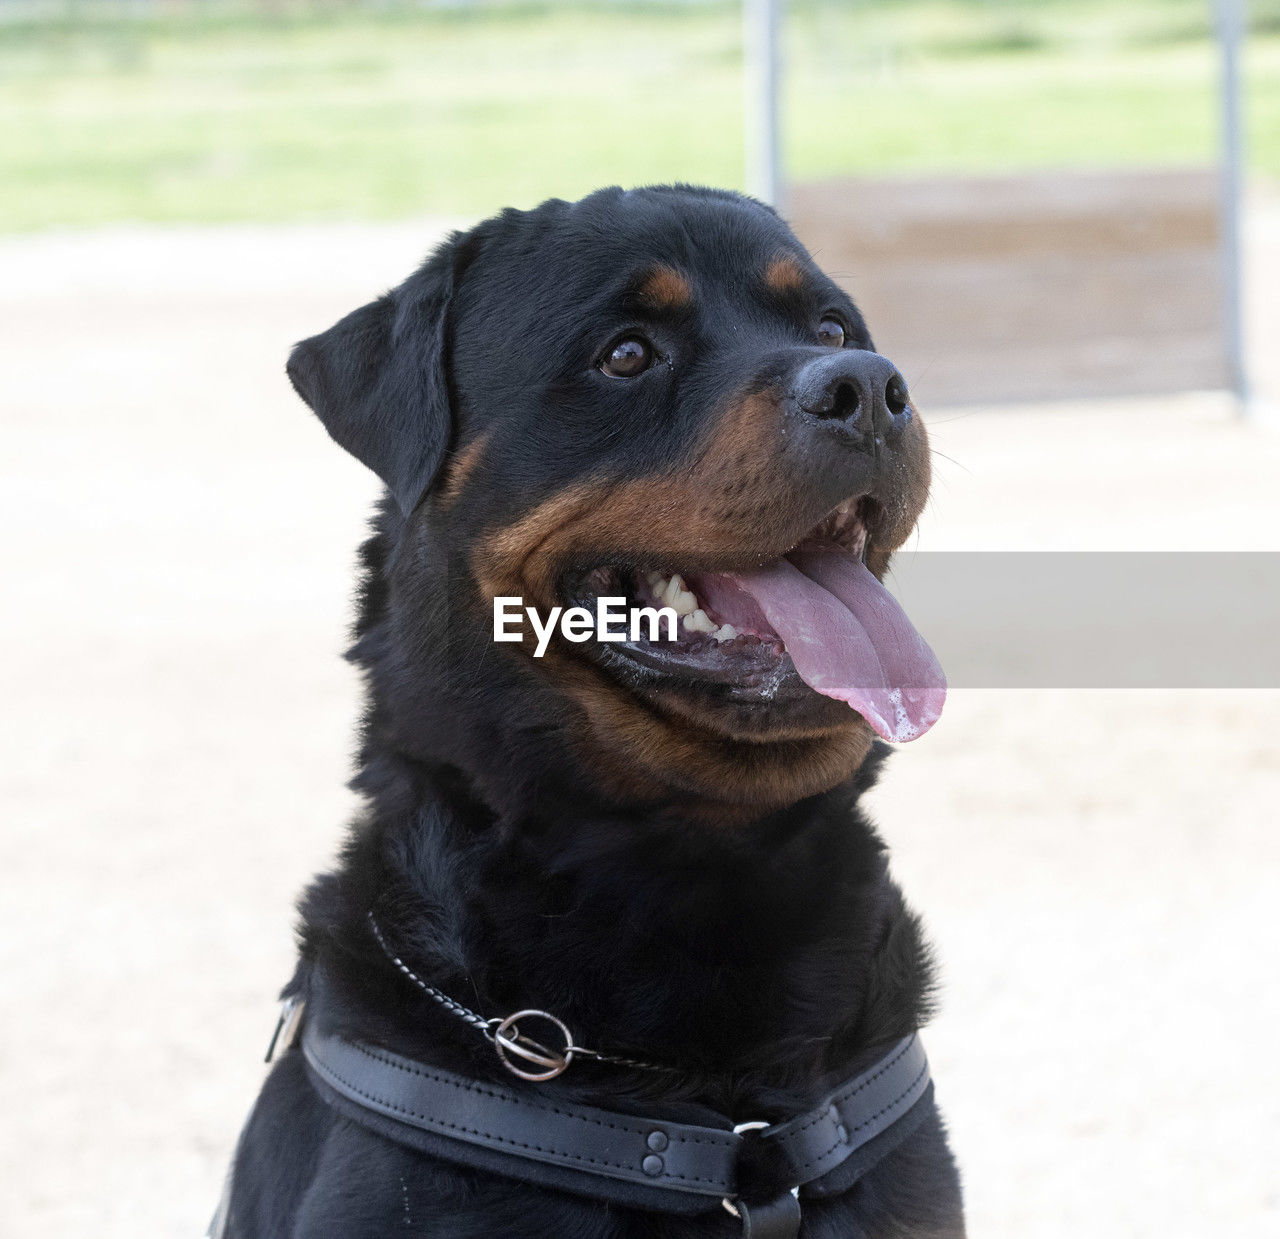 one animal, dog, animal themes, canine, animal, pet, domestic animals, mammal, collar, black, pet collar, looking, day, rottweiler, focus on foreground, animal body part, sticking out tongue, looking away, no people, facial expression, portrait, outdoors, nature